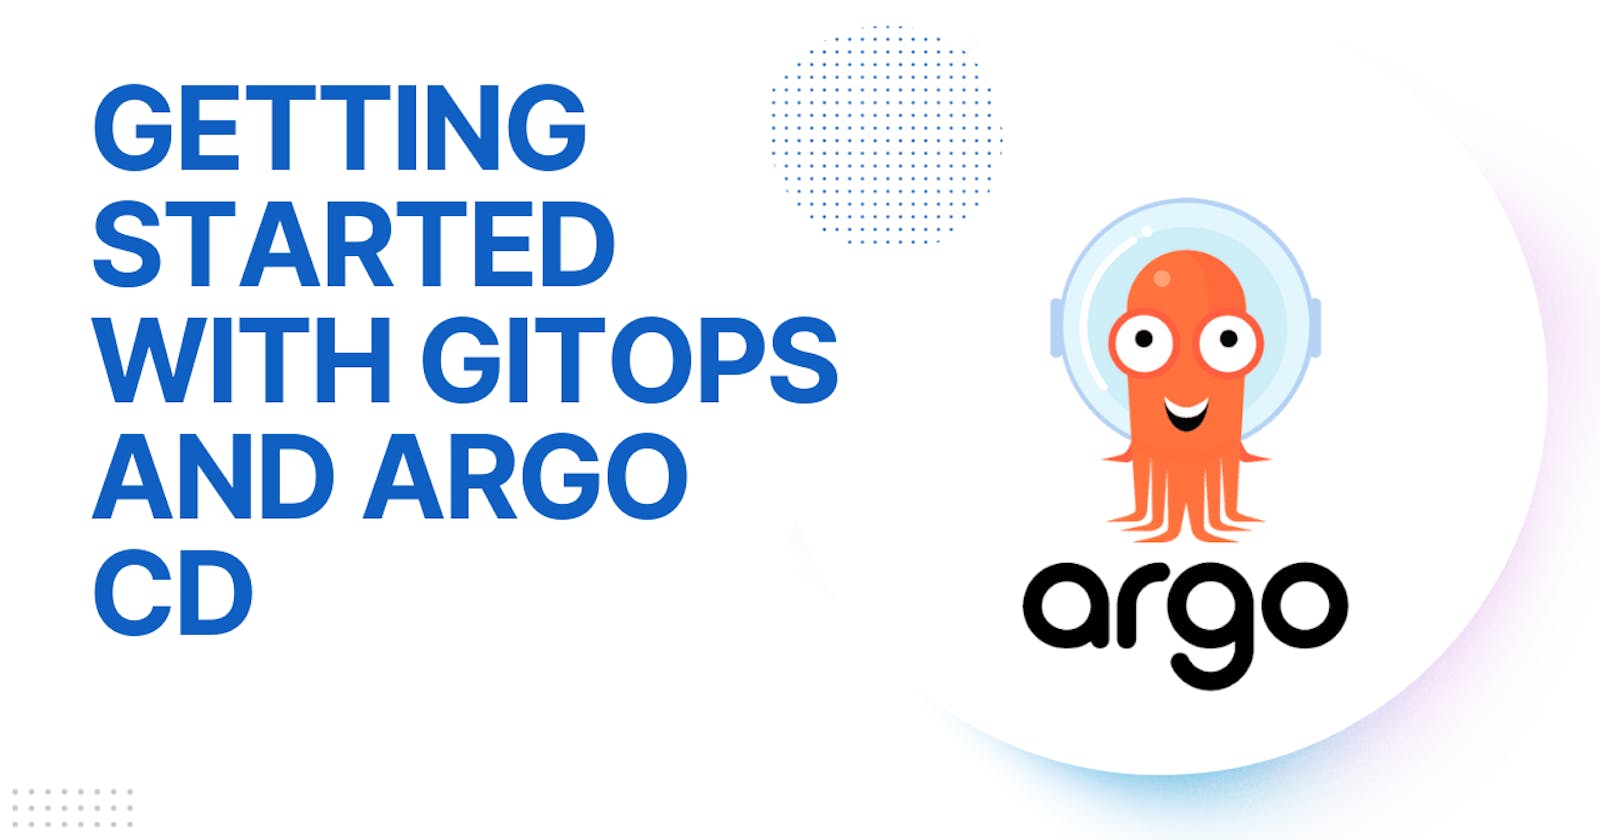 Getting started with GitOps and Argo CD